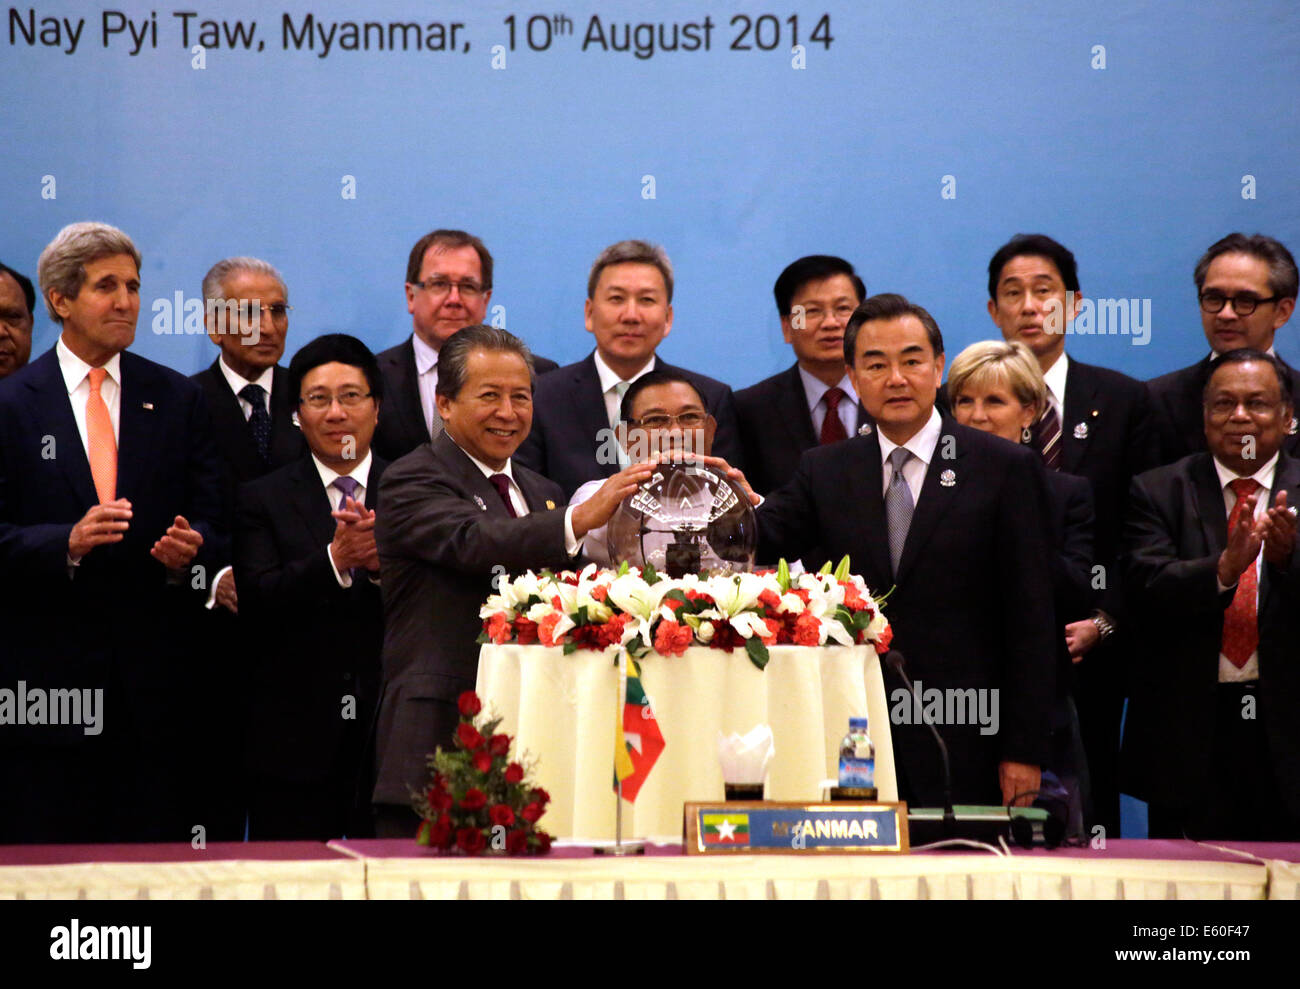 Nay Pyi Taw, Myanmar. 10th Aug, 2014. Chinese Foreign Minister Wang Yi (R front) and other delegates attend the launching ceremony of the logo of the ASEAN Regional Forum Disaster Relief Exercises 2015 (ARF DiREx 2015) on the sidelines of the 21st ASEAN Regional Forum (ARF) Retreat Session at Myanmar International Convention Center (MICC) in Nay Pyi Taw, Myanmar, Aug. 10, 2014. © U Aung/Xinhua/Alamy Live News Stock Photo